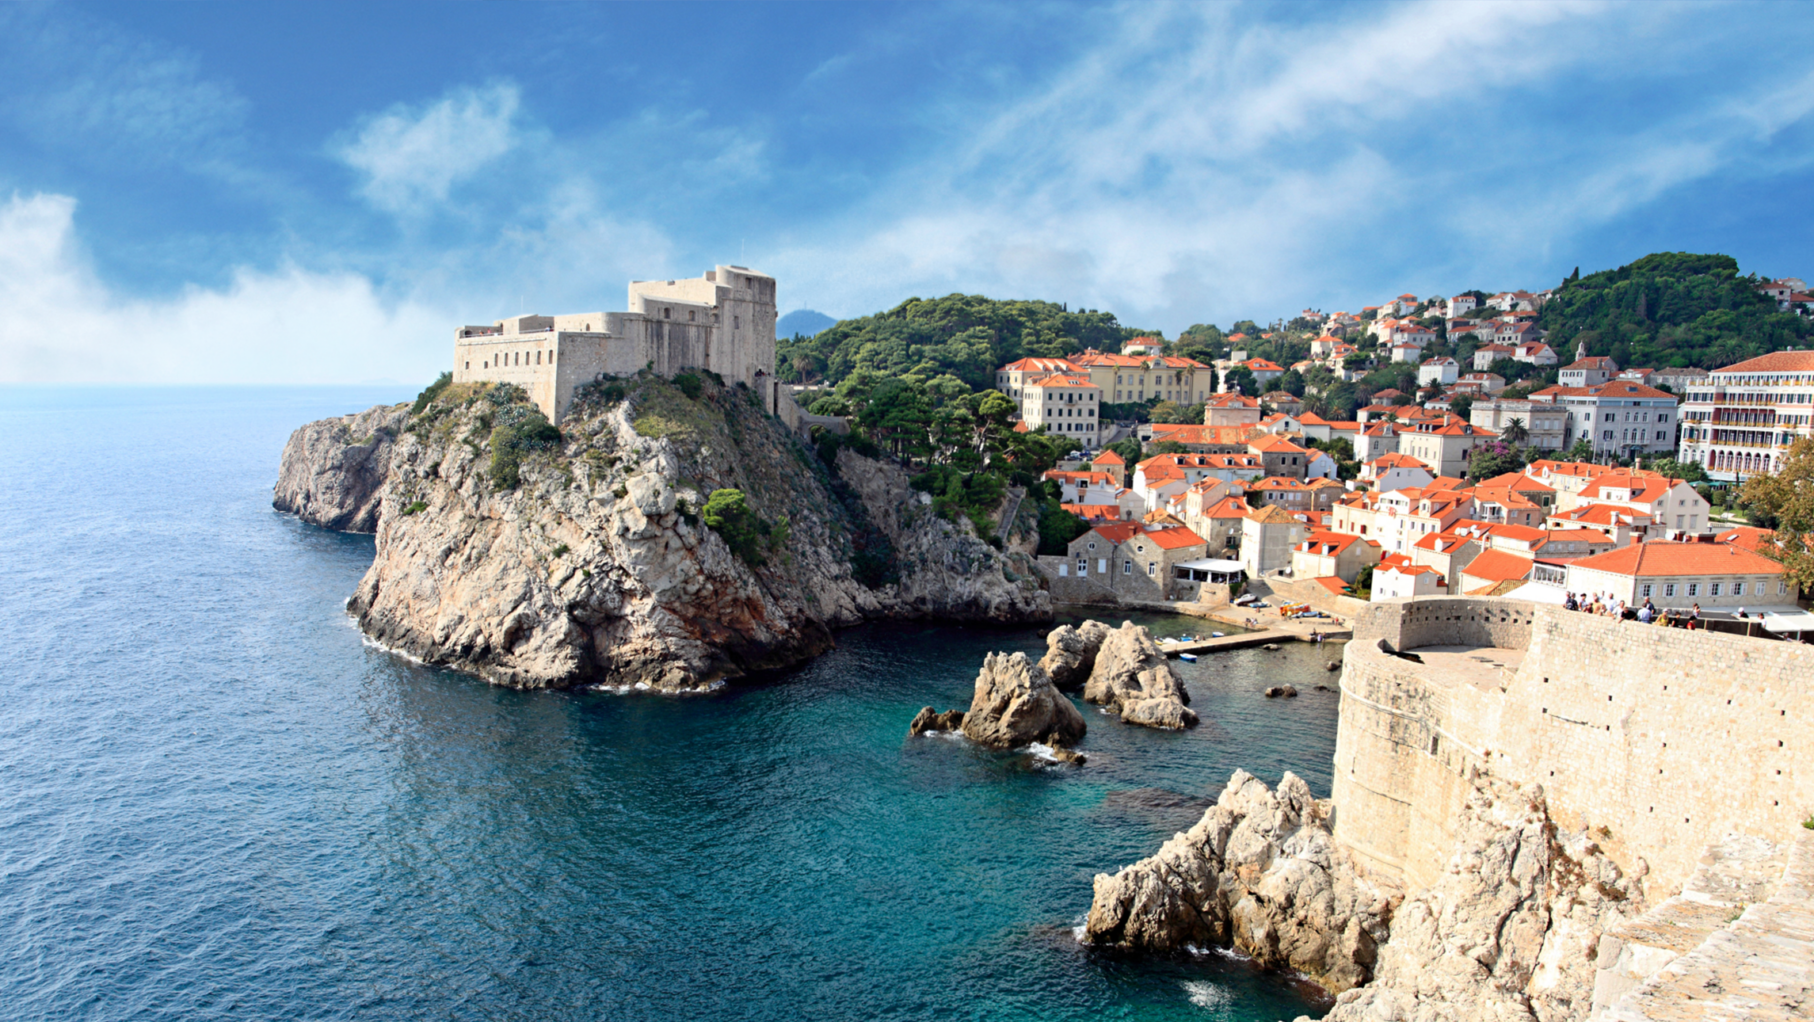 A view of the Mediterranean Sea in Dubrovnik